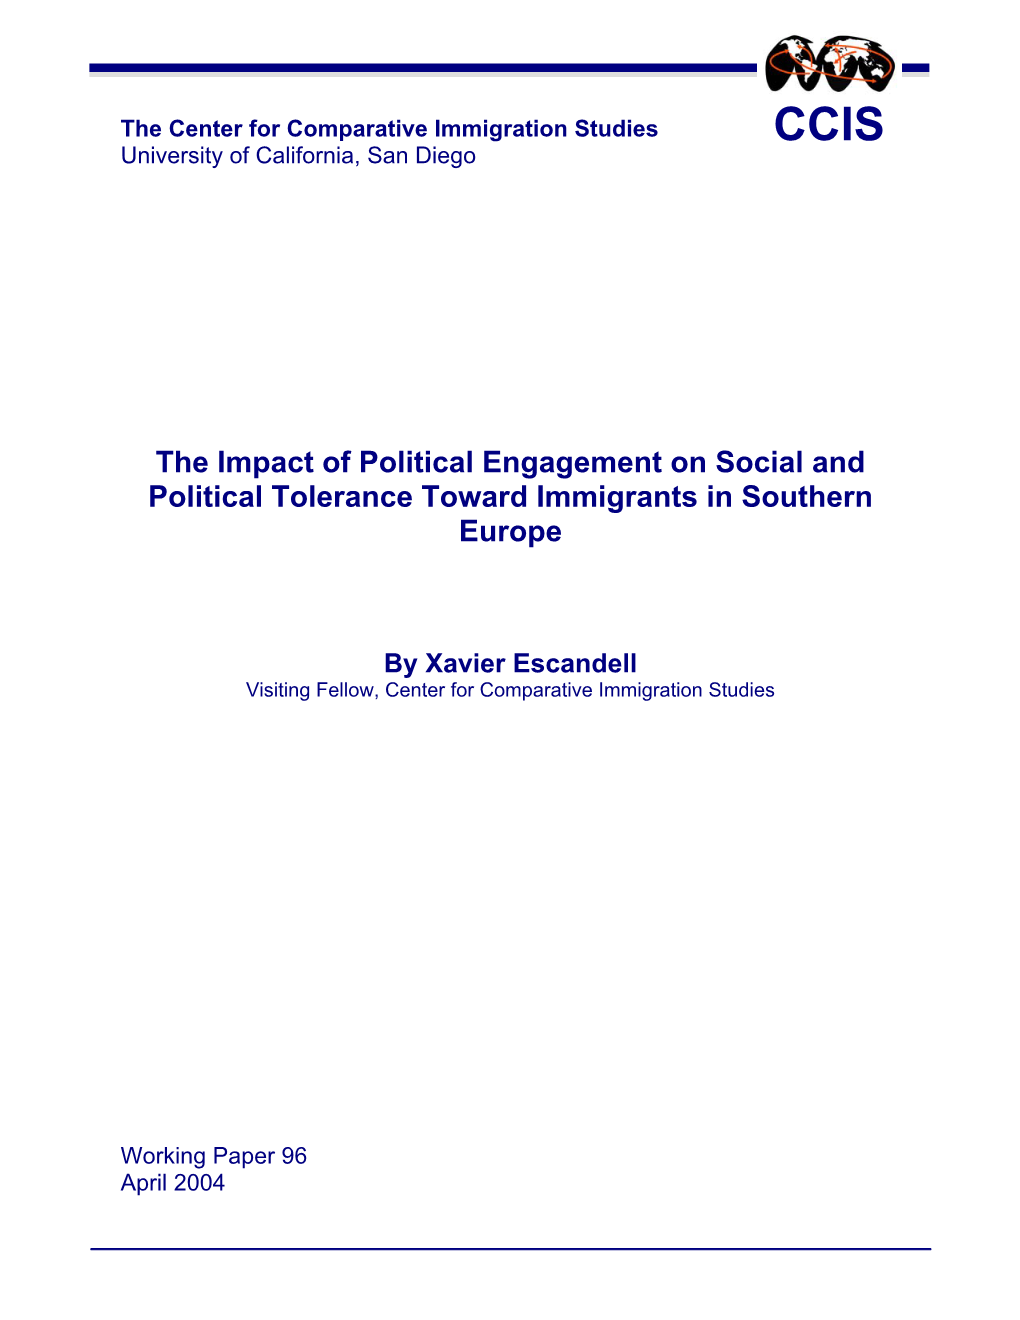 The Impact of Political Engagement on Social and Political Tolerance Toward Immigrants in Southern Europe